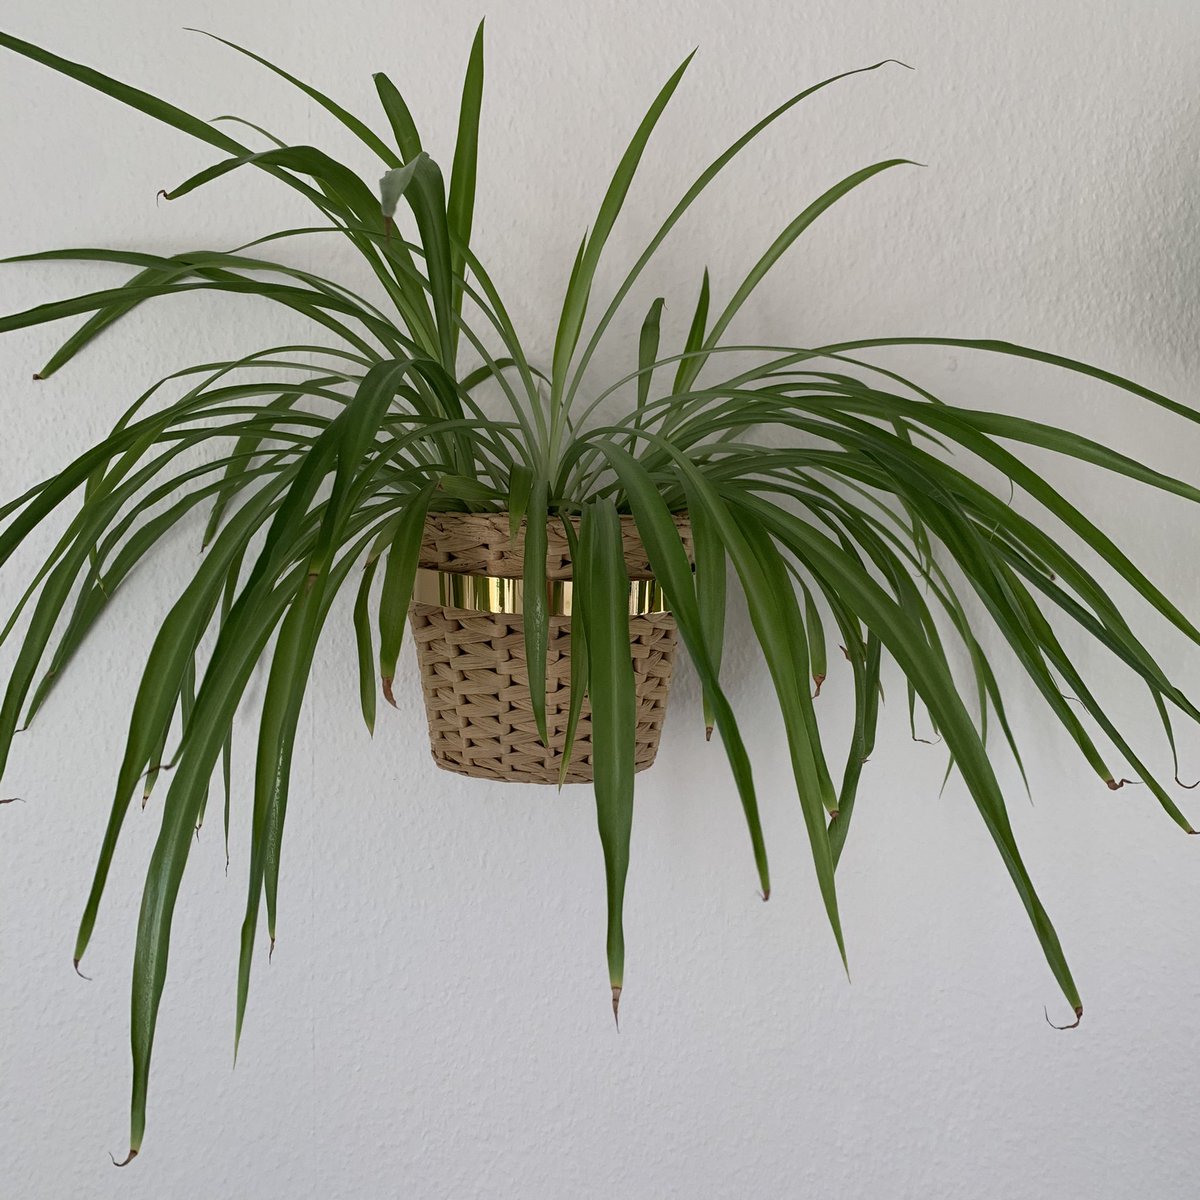 My small spider plant! (Also wall mounted.) It doesn’t have any babied so what is even the point of having it on the wall? Get on that, spider plant.